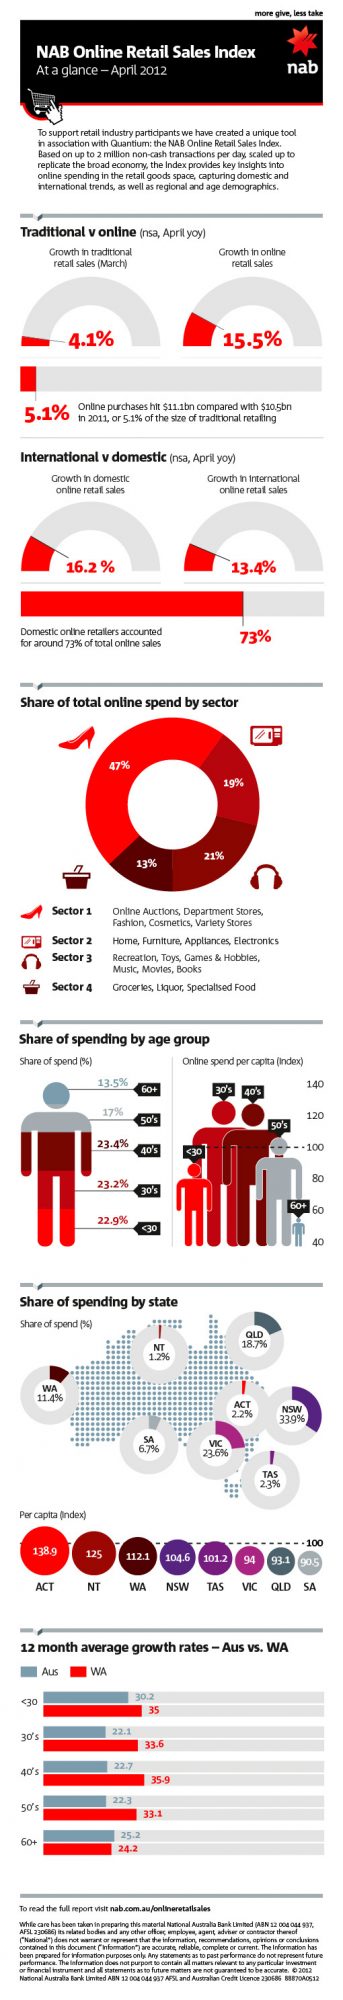 NAB Online Retail Sales Index - At a glance infographic